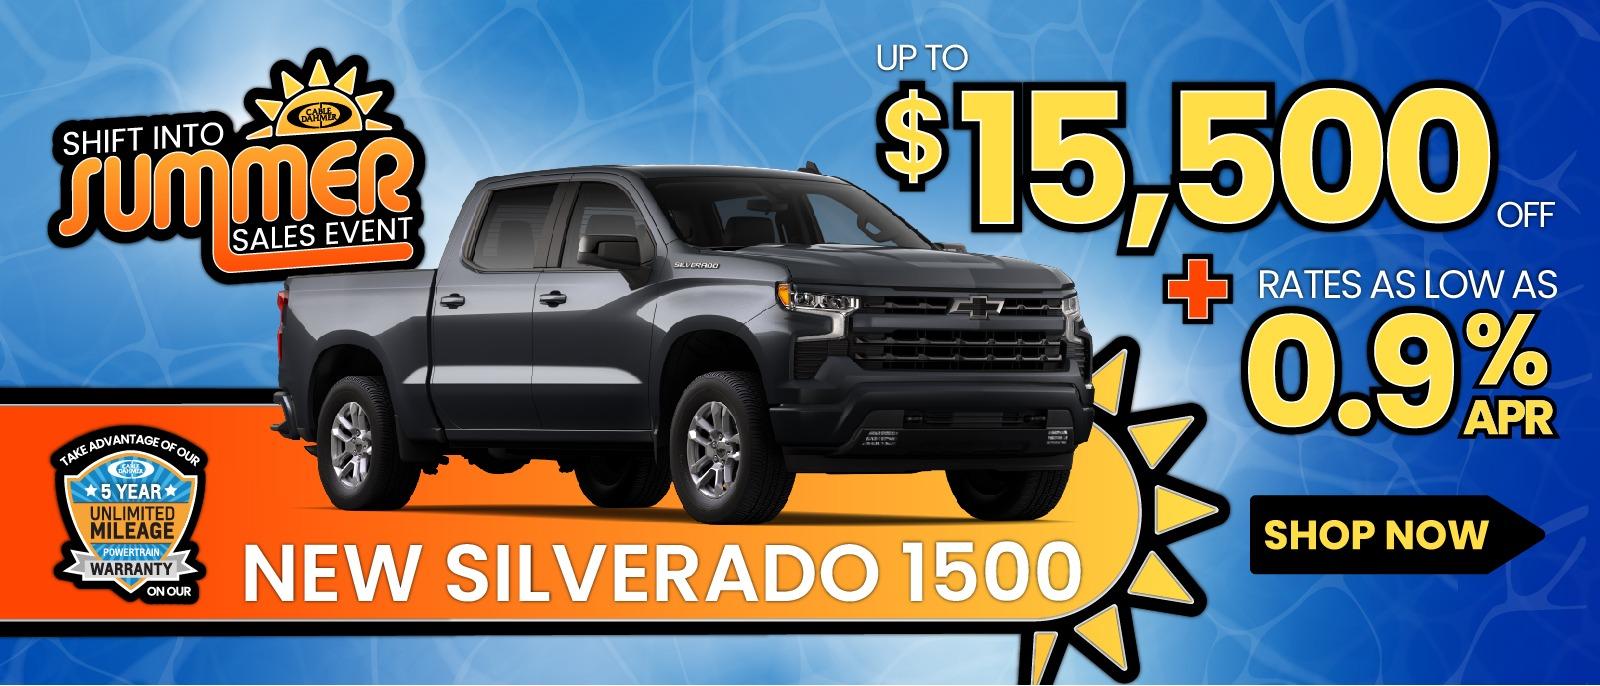 Up to $15,000 off + rates as low as 0% APR